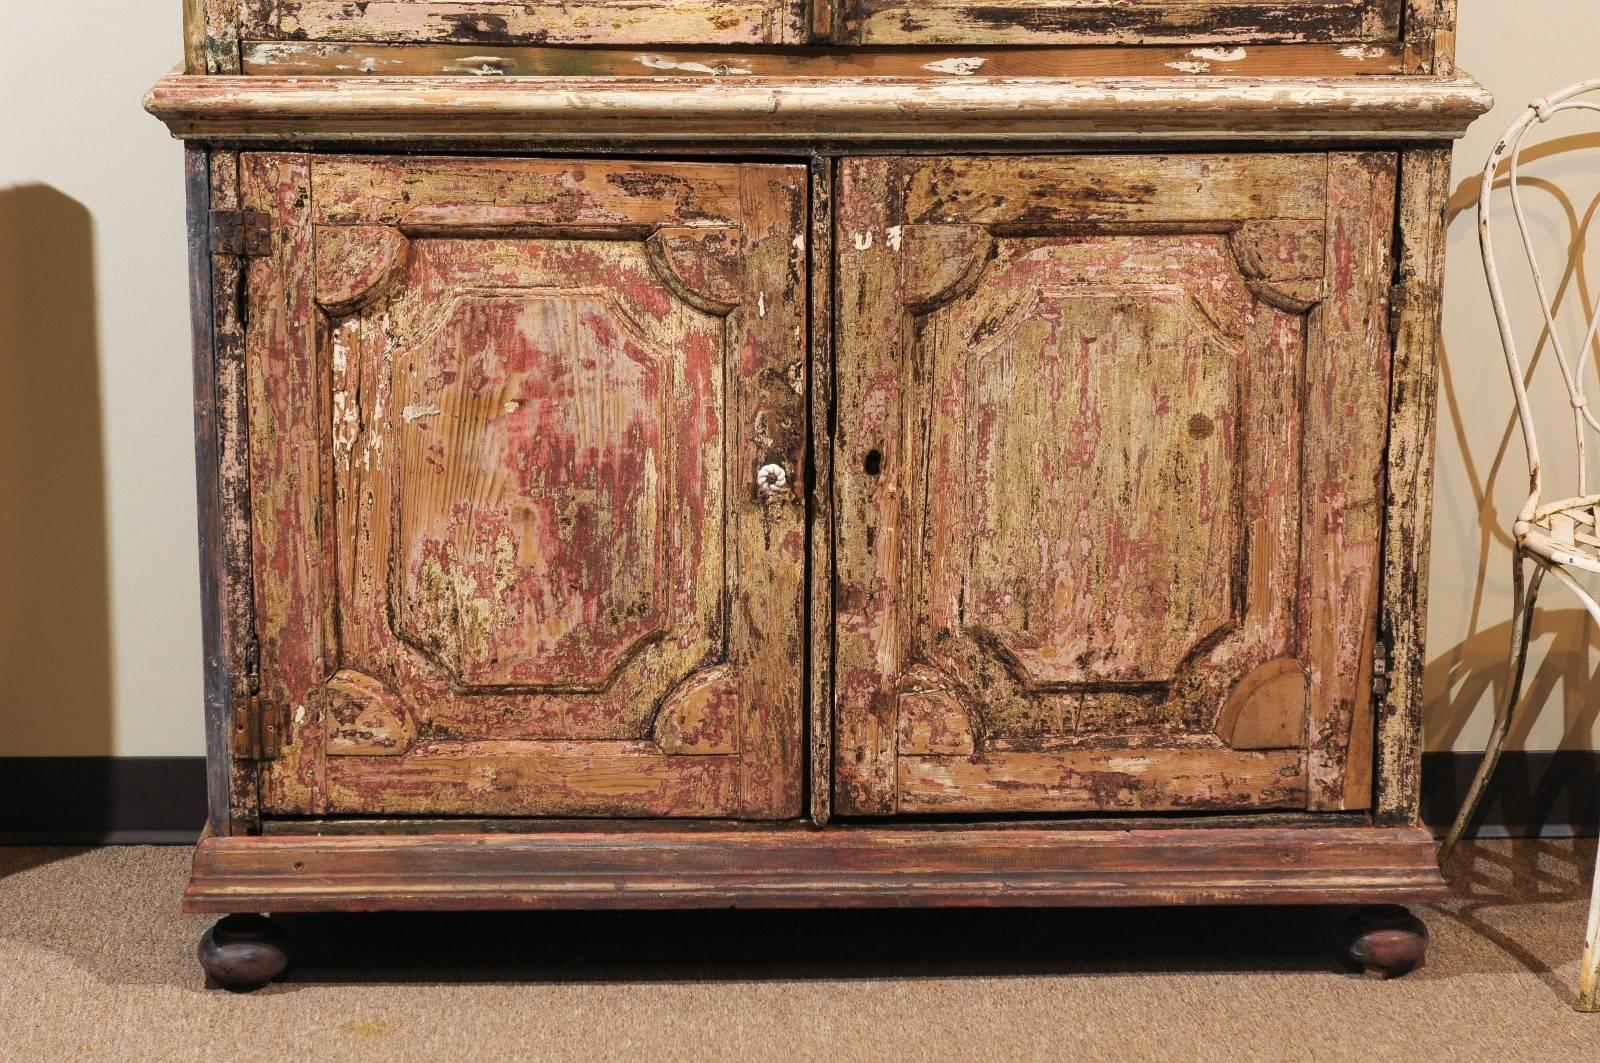  18th Century Dutch Buffet Deux Corps in a Brown/Red Distressed Finish, c.1780 For Sale 3